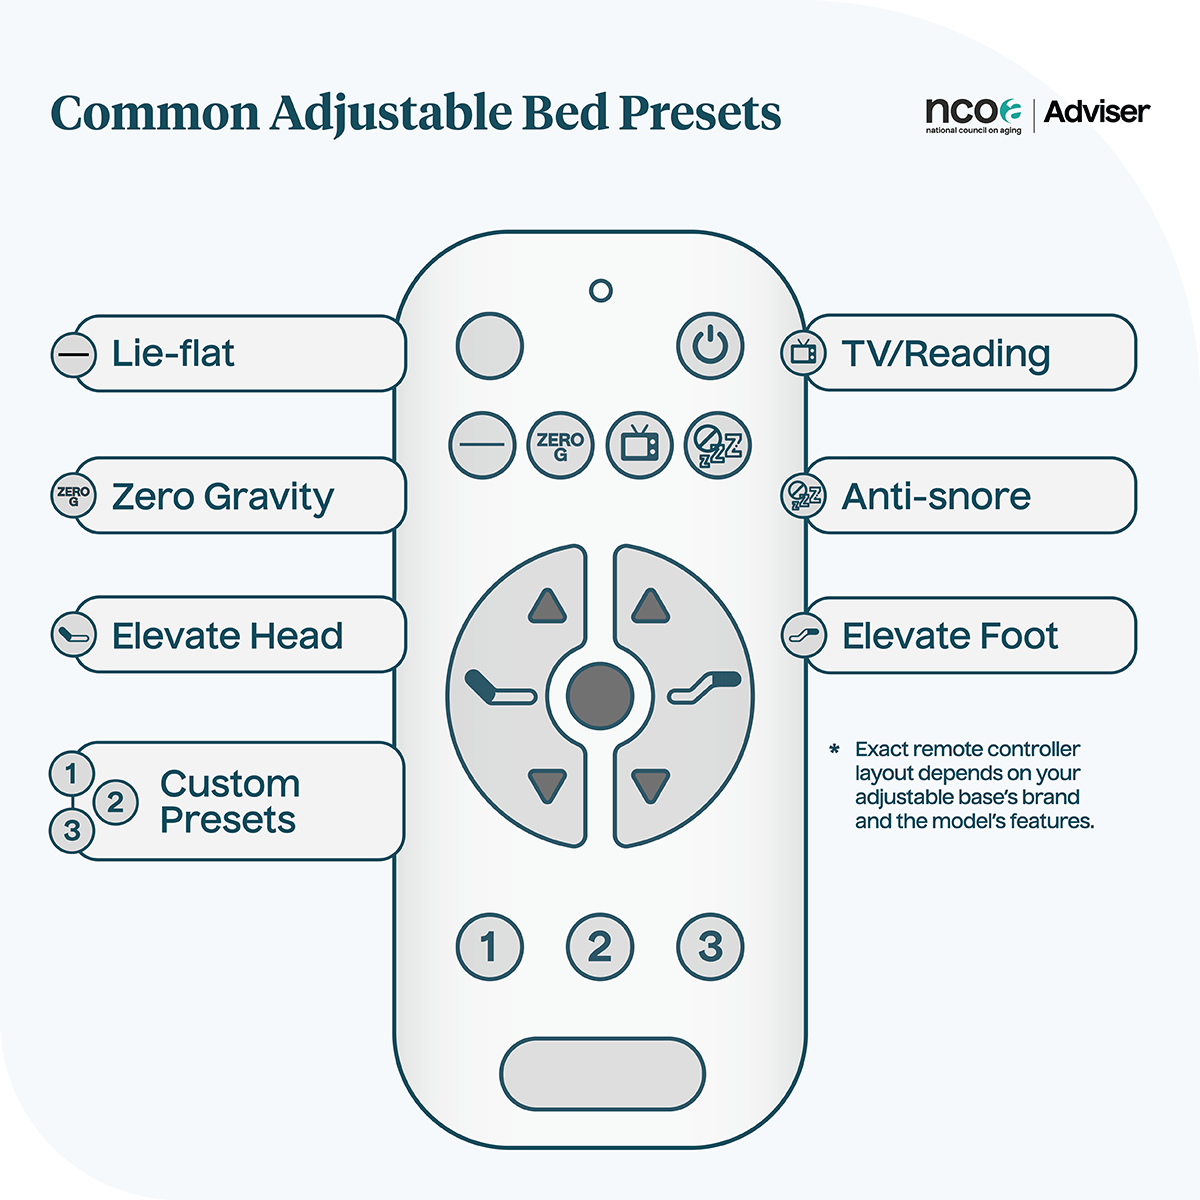 Graphic image of an adjustable bed remote listing the common preset position settings